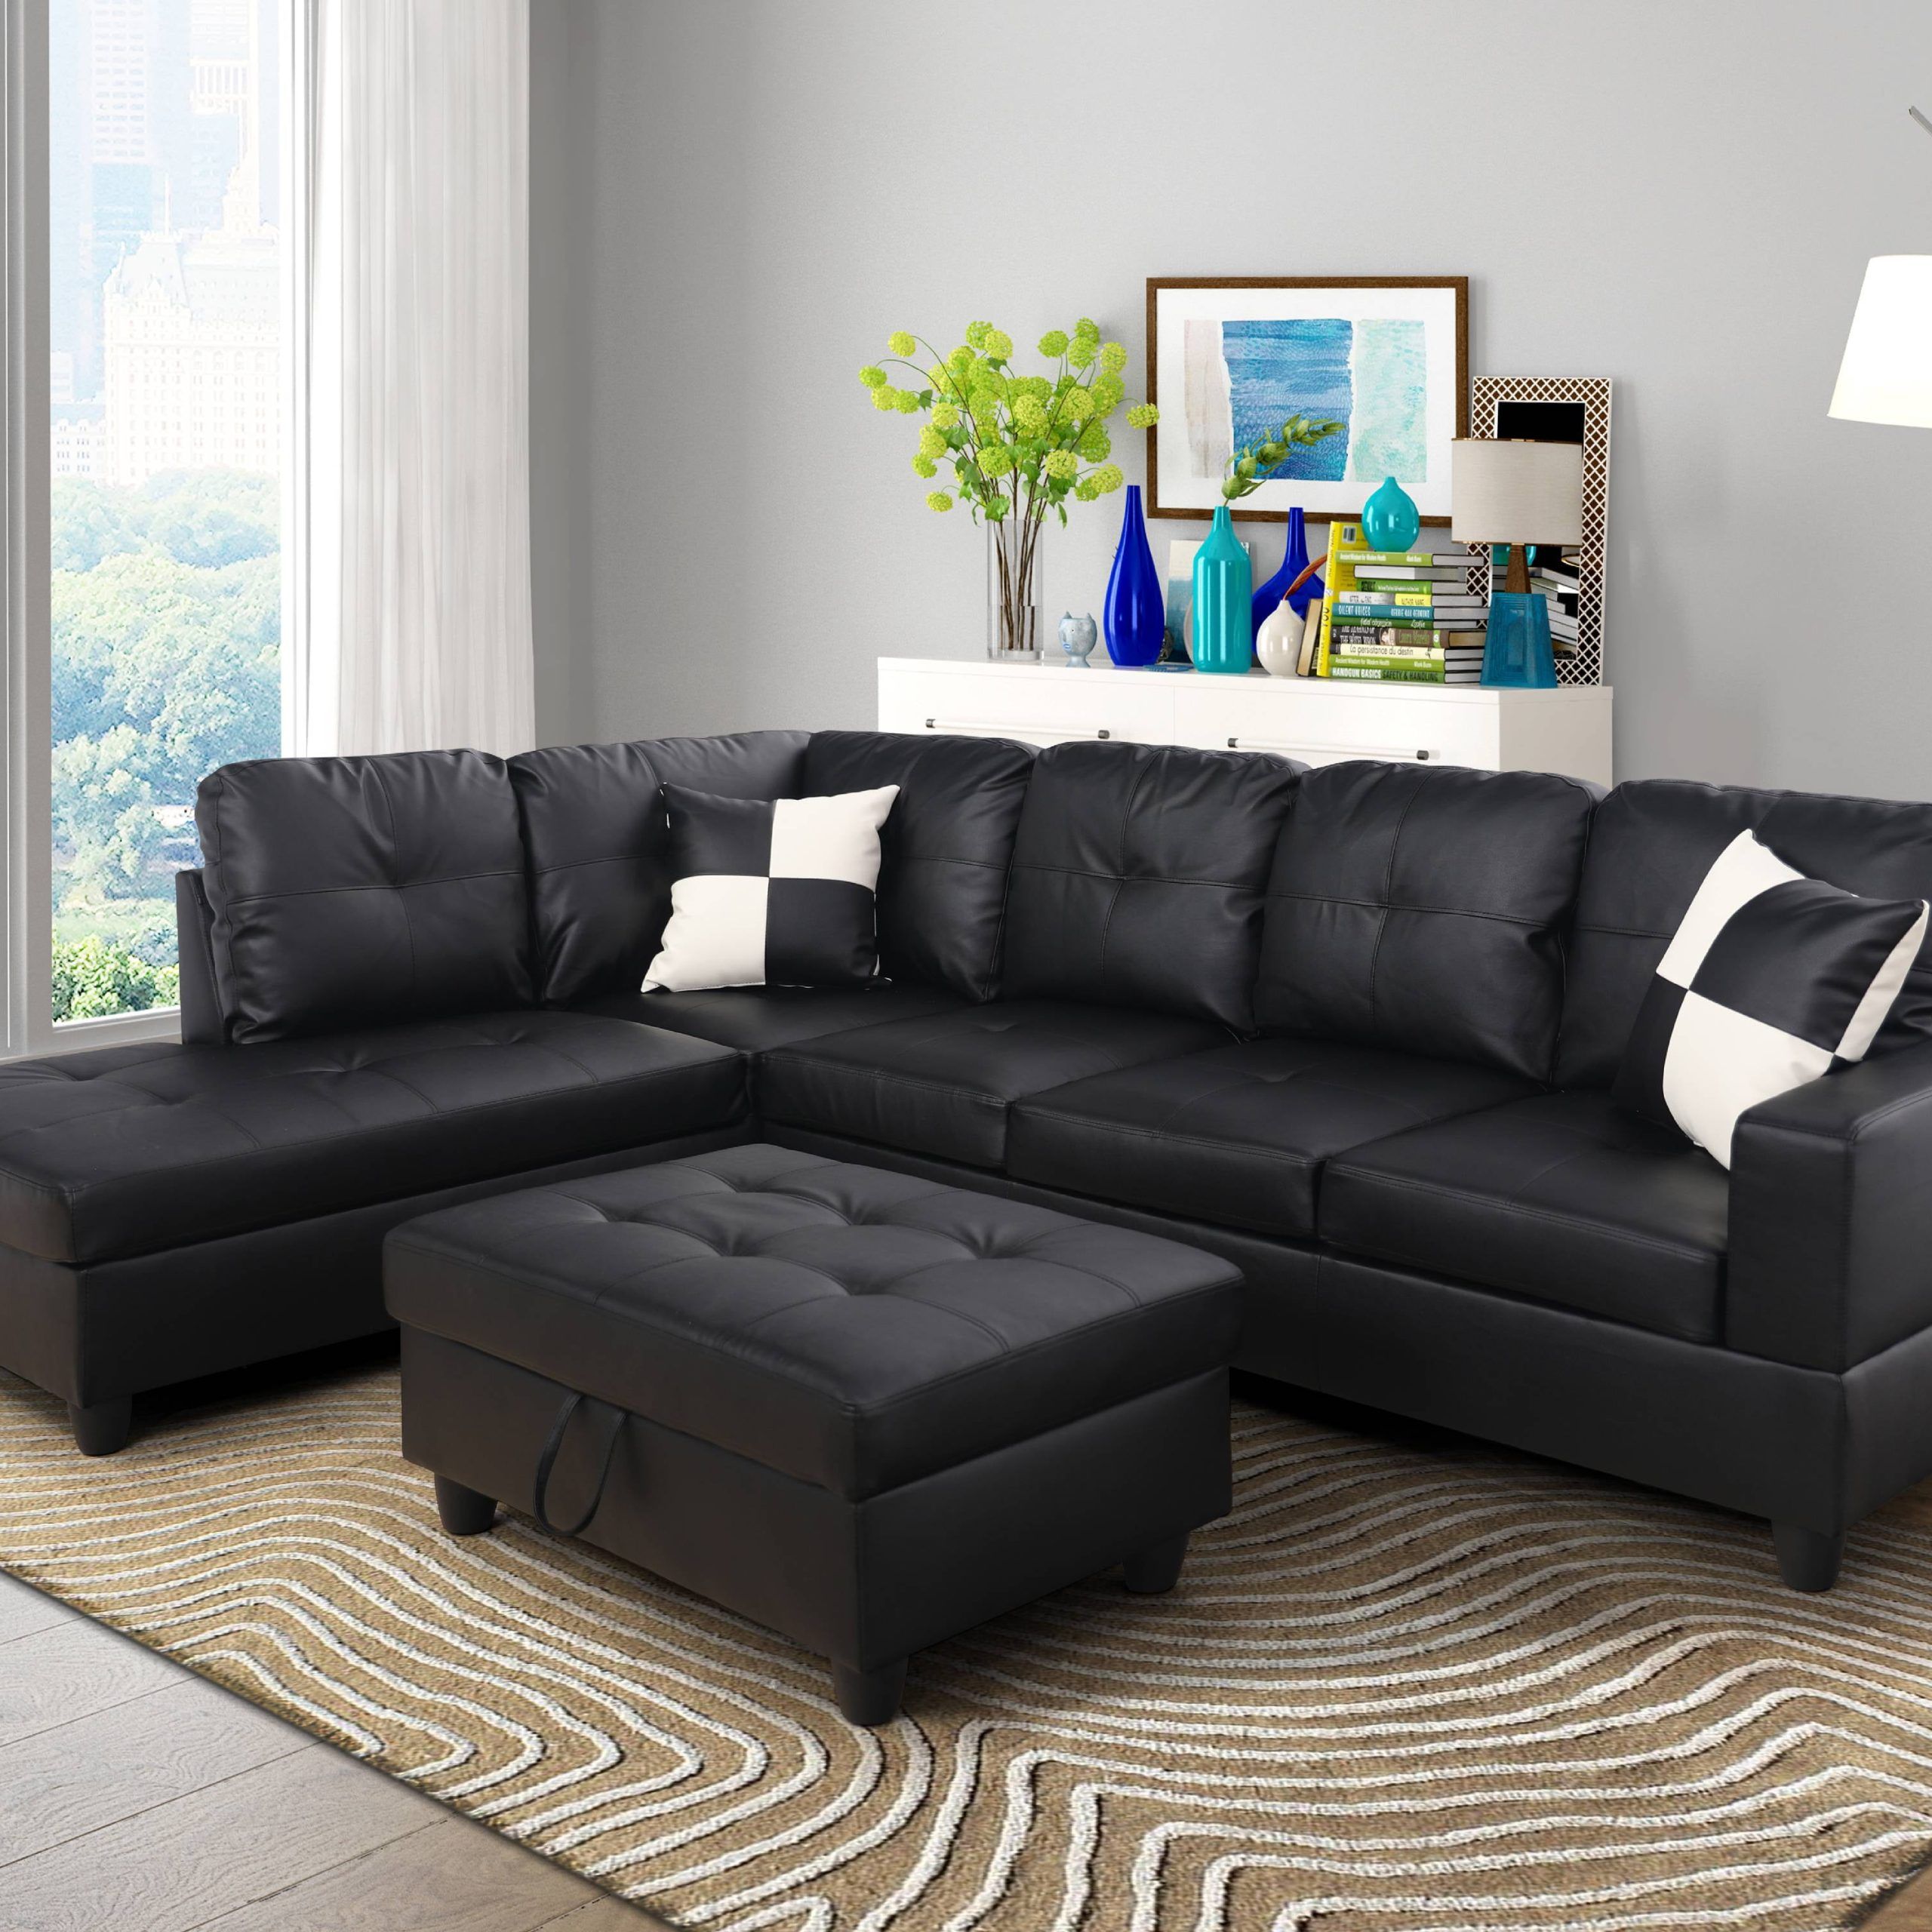 For U Furnishing Classic Black Faux Leather Sectional Sofa, Right With Faux Leather Sectional Sofa Sets (Gallery 1 of 20)